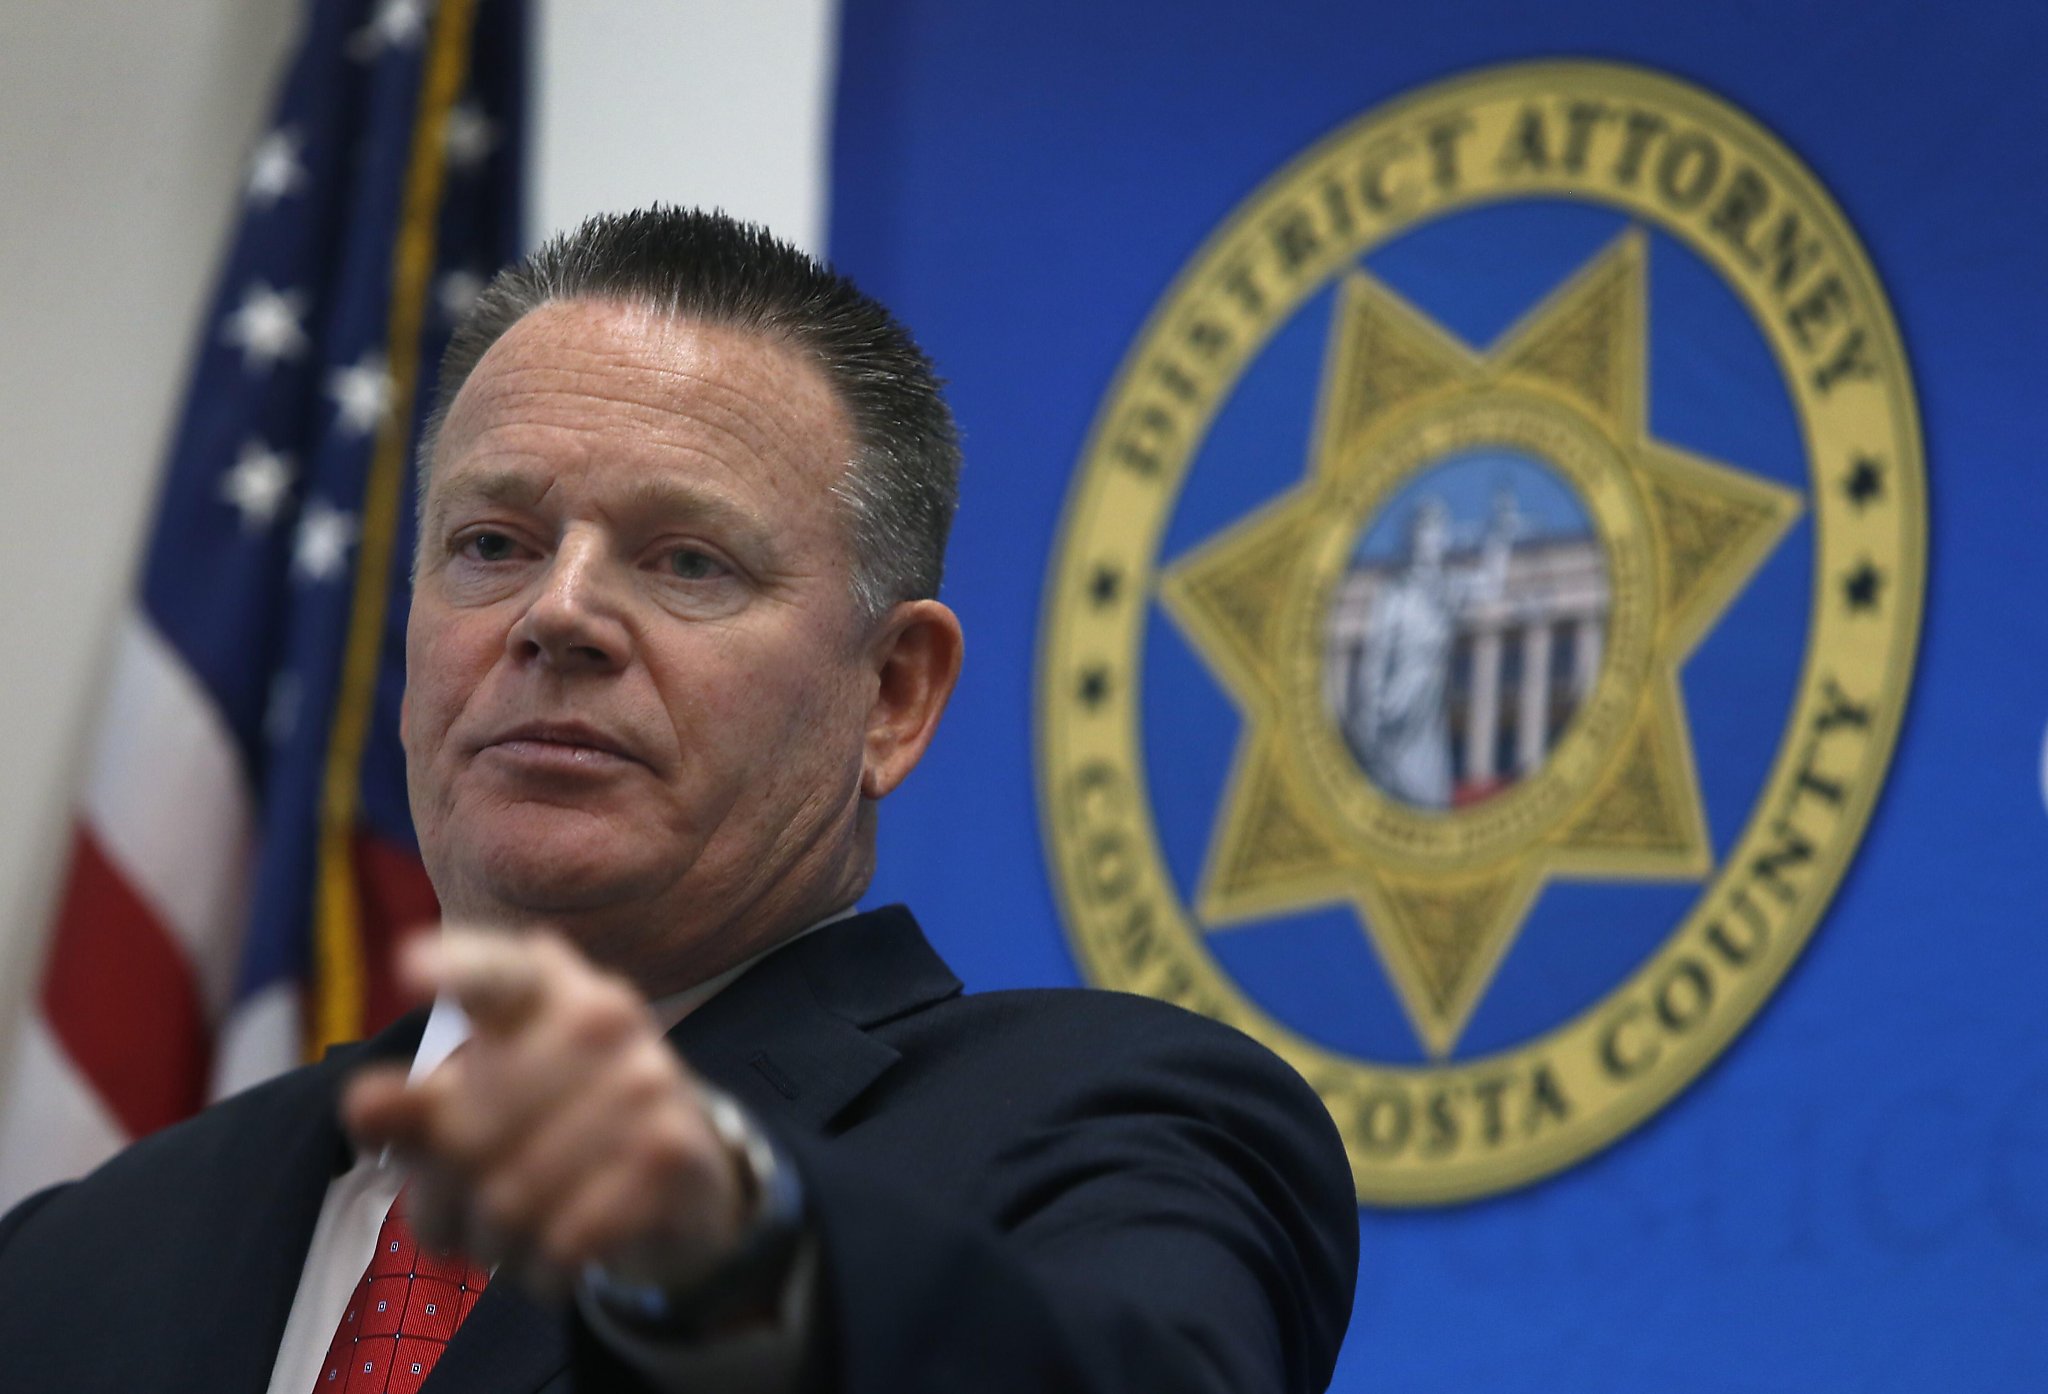 Contra Costa County DA quits after charges filed